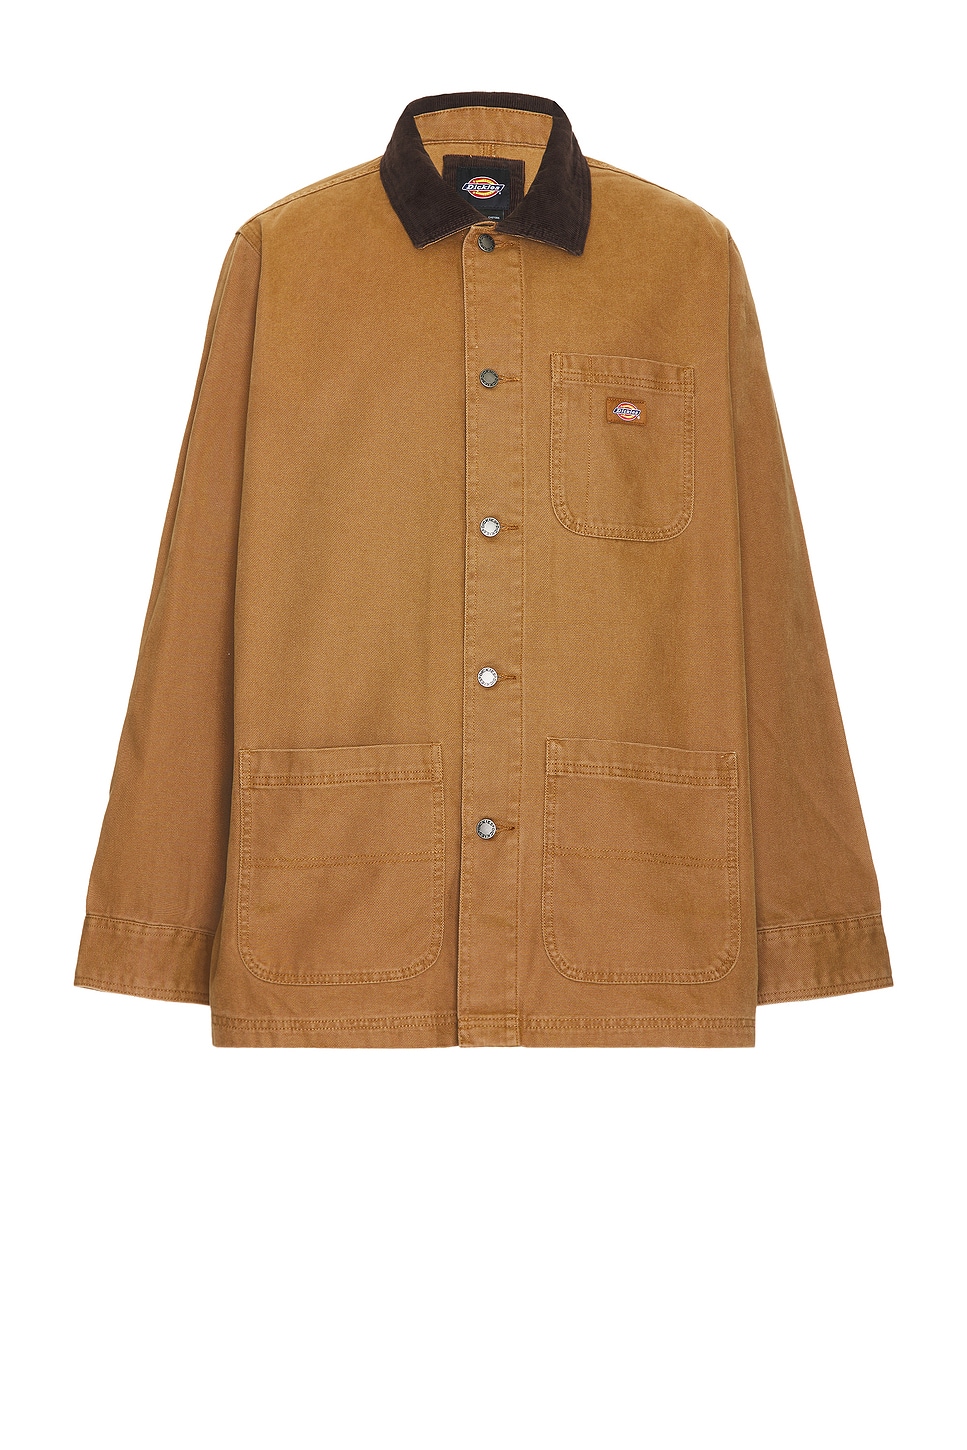 Image 1 of Dickies Duck Unlined Chore Coat in Stonewashed Brown Duck